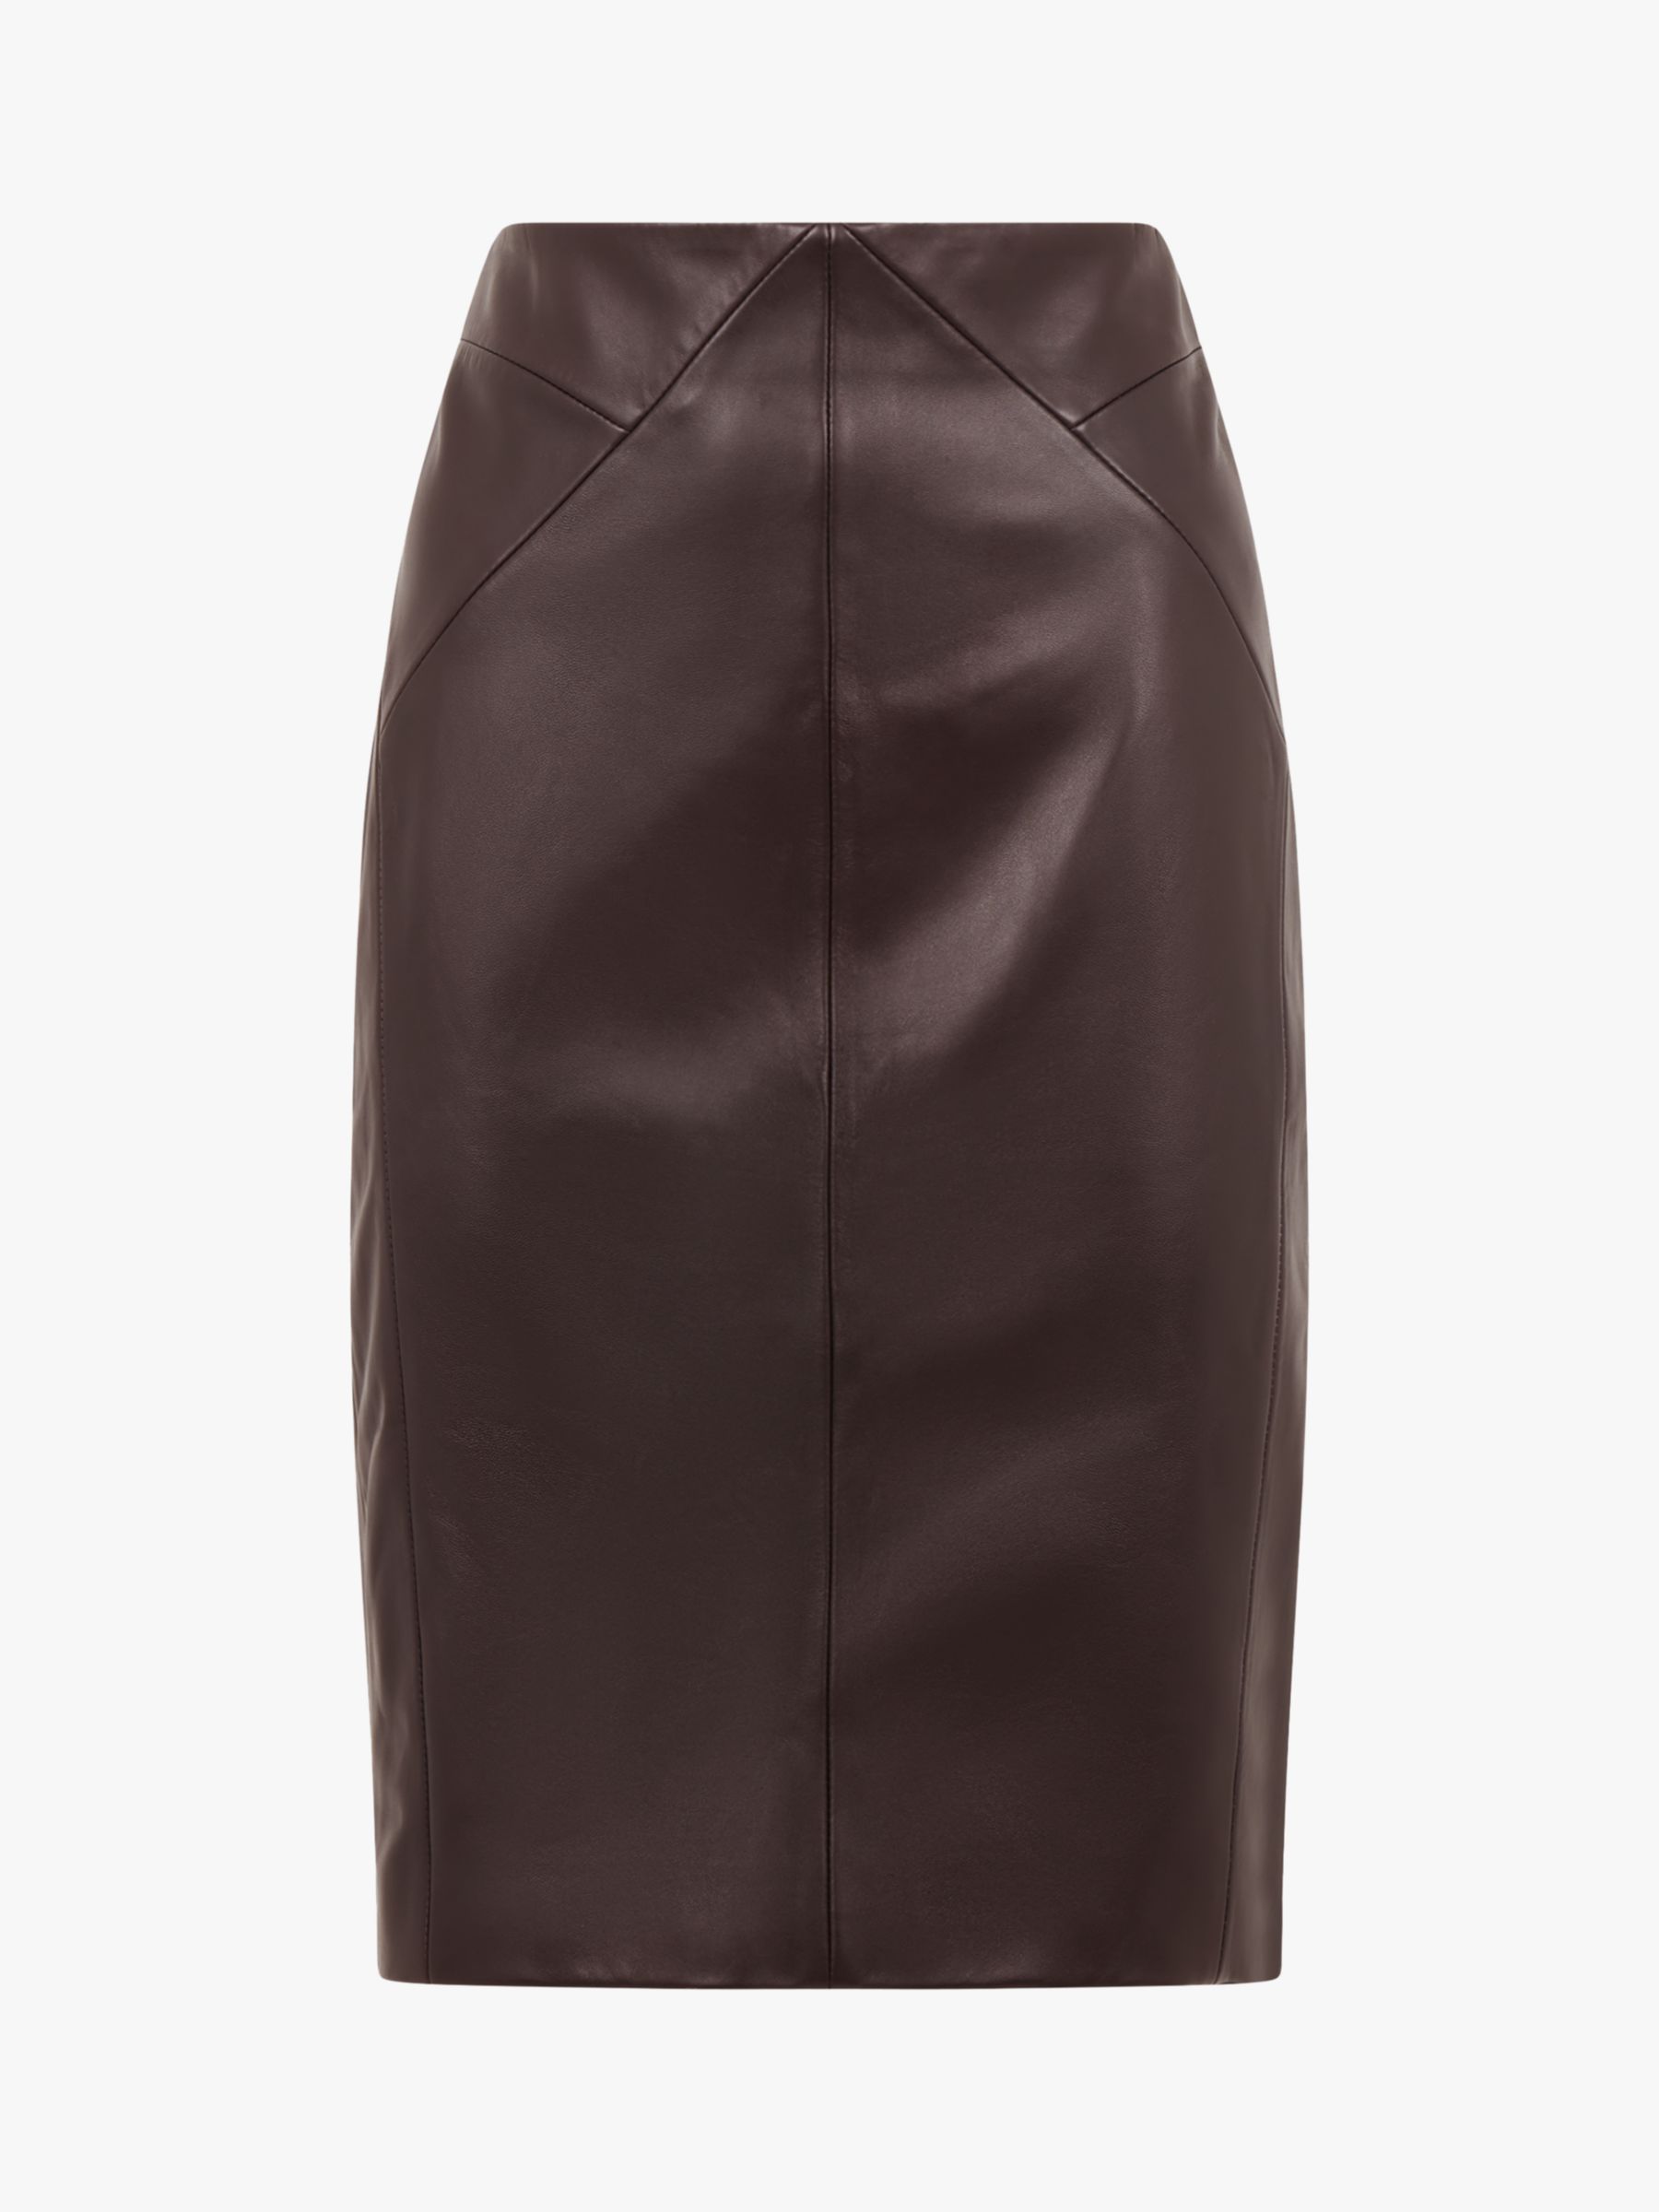 Buy Reiss Raya Leather Pencil Skirt, Berry Online at johnlewis.com